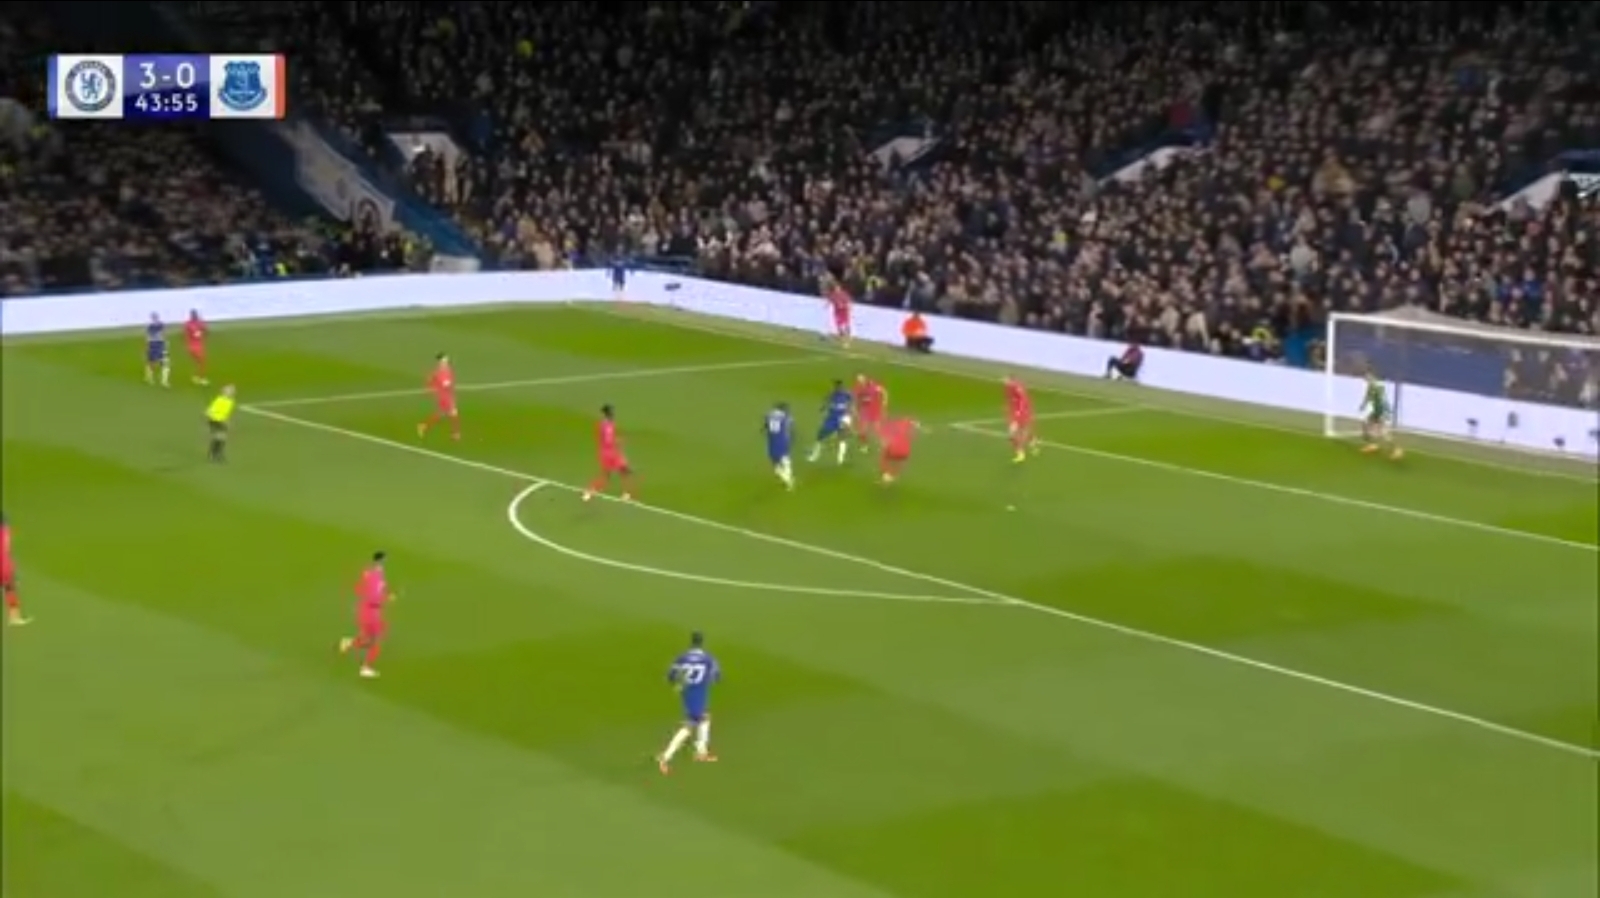 Watch: Jackson adds a fourth for Chelsea with a sumptuous volley